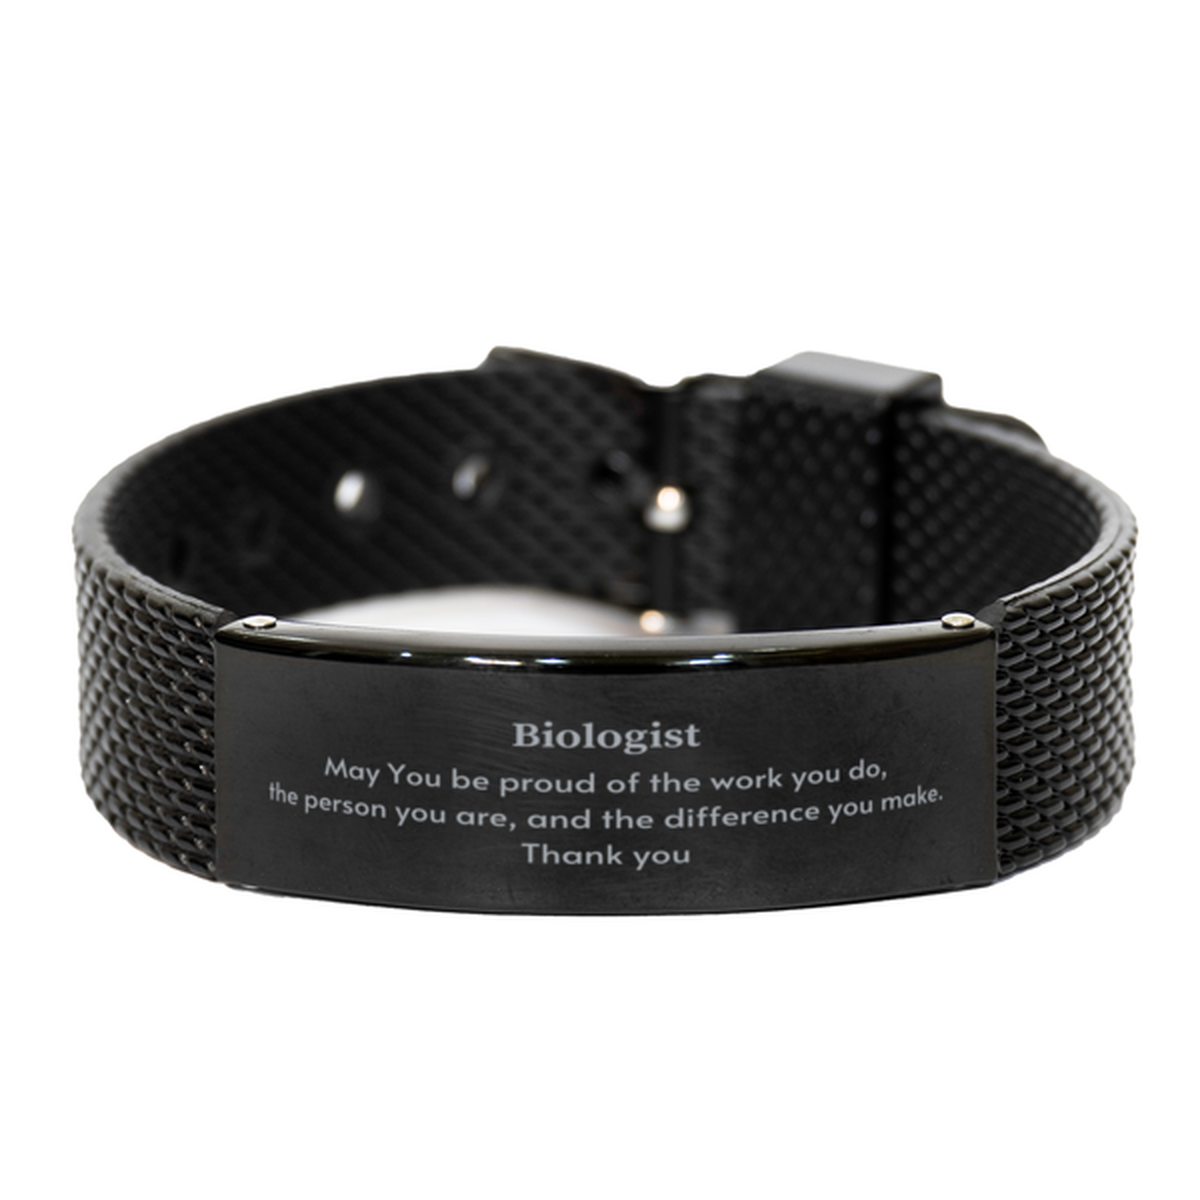 Heartwarming Black Shark Mesh Bracelet Retirement Coworkers Gifts for Biologist, Biologist May You be proud of the work you do, the person you are Gifts for Boss Men Women Friends